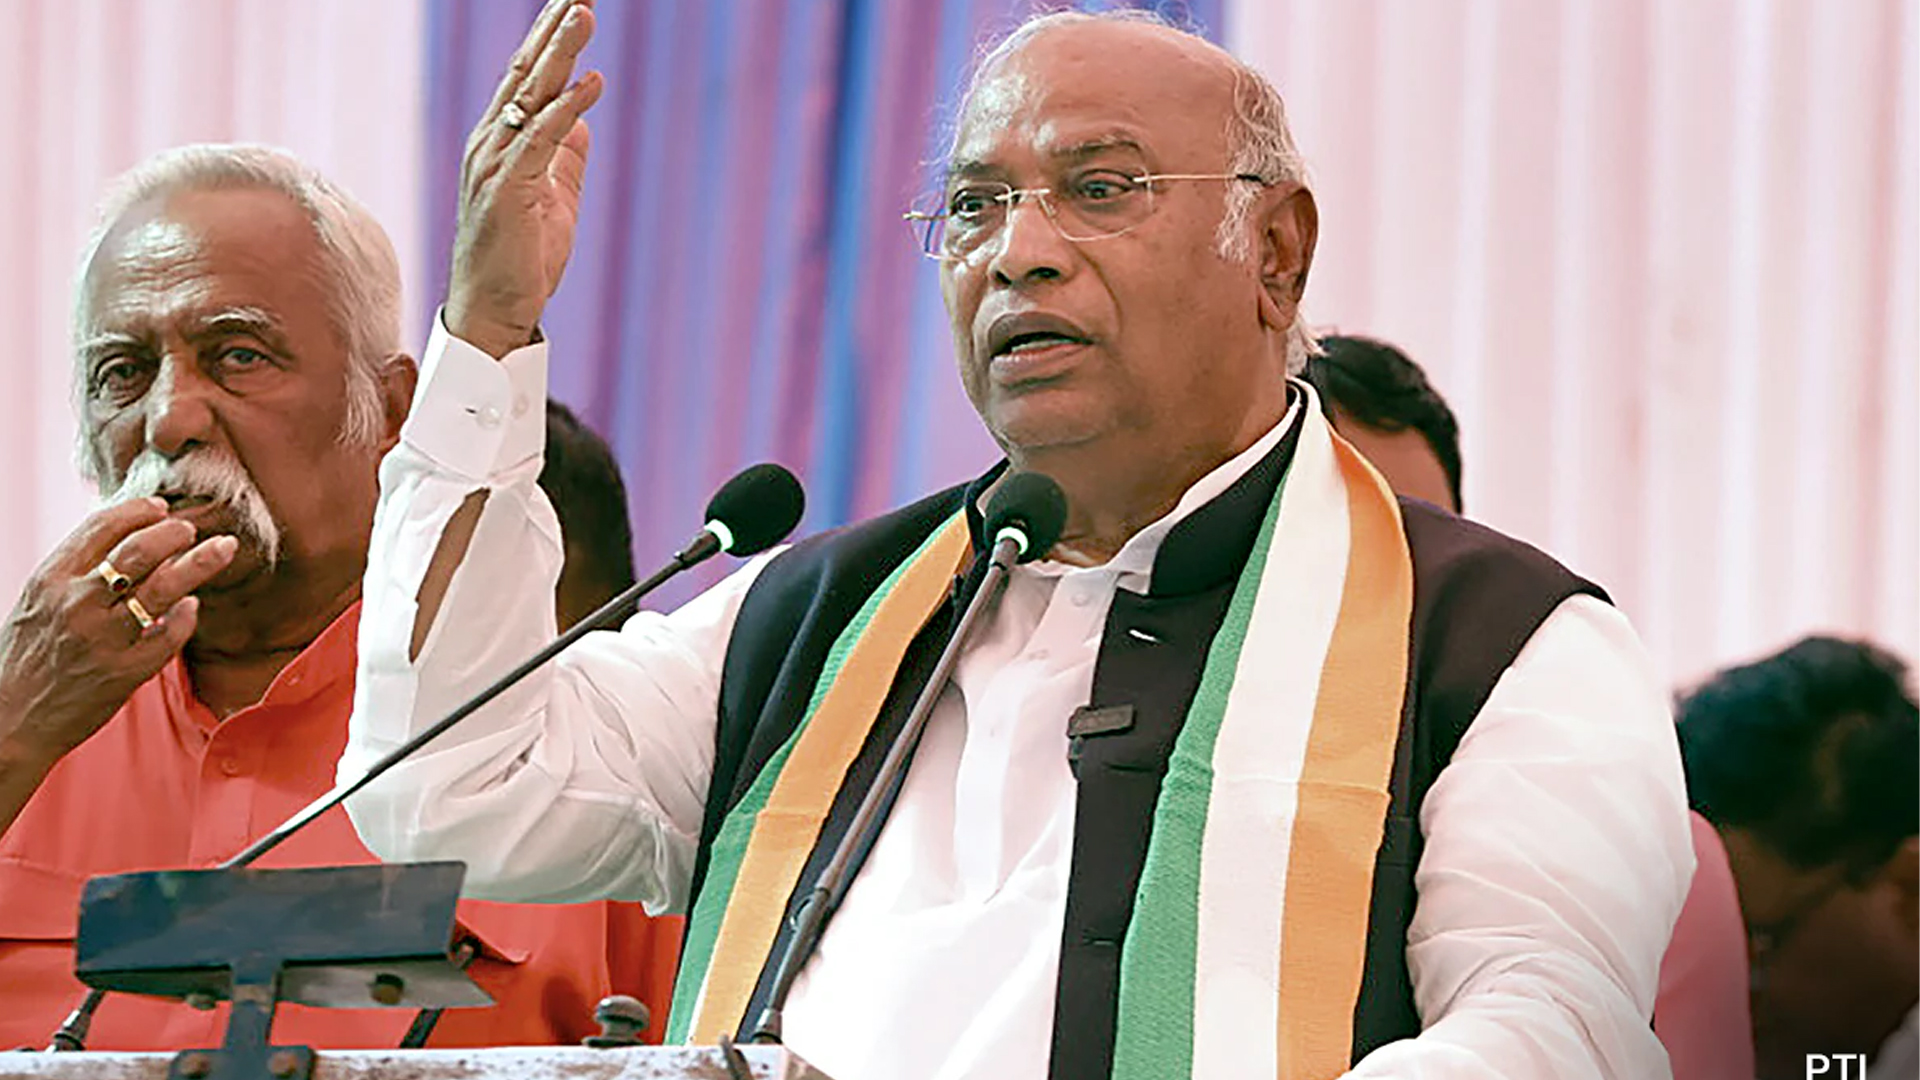 'Modi Ki Guarantee' is adulterated with 'power of lies': Kharge slams govt over housing scheme